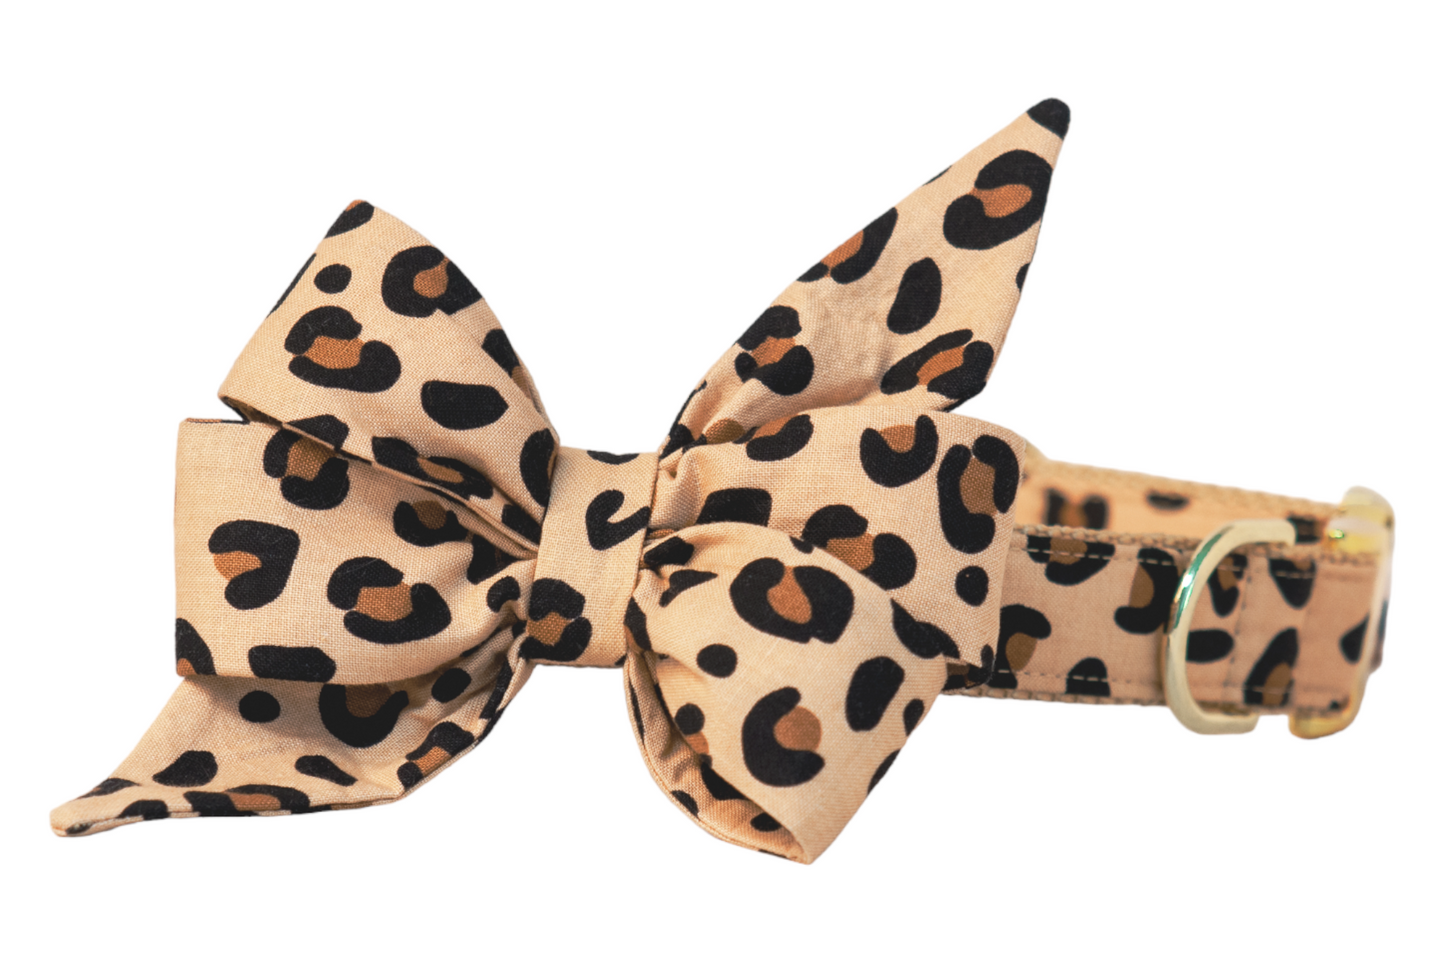 Party Animal Belle Bow Dog Collar - Two Styles! - Crew LaLa